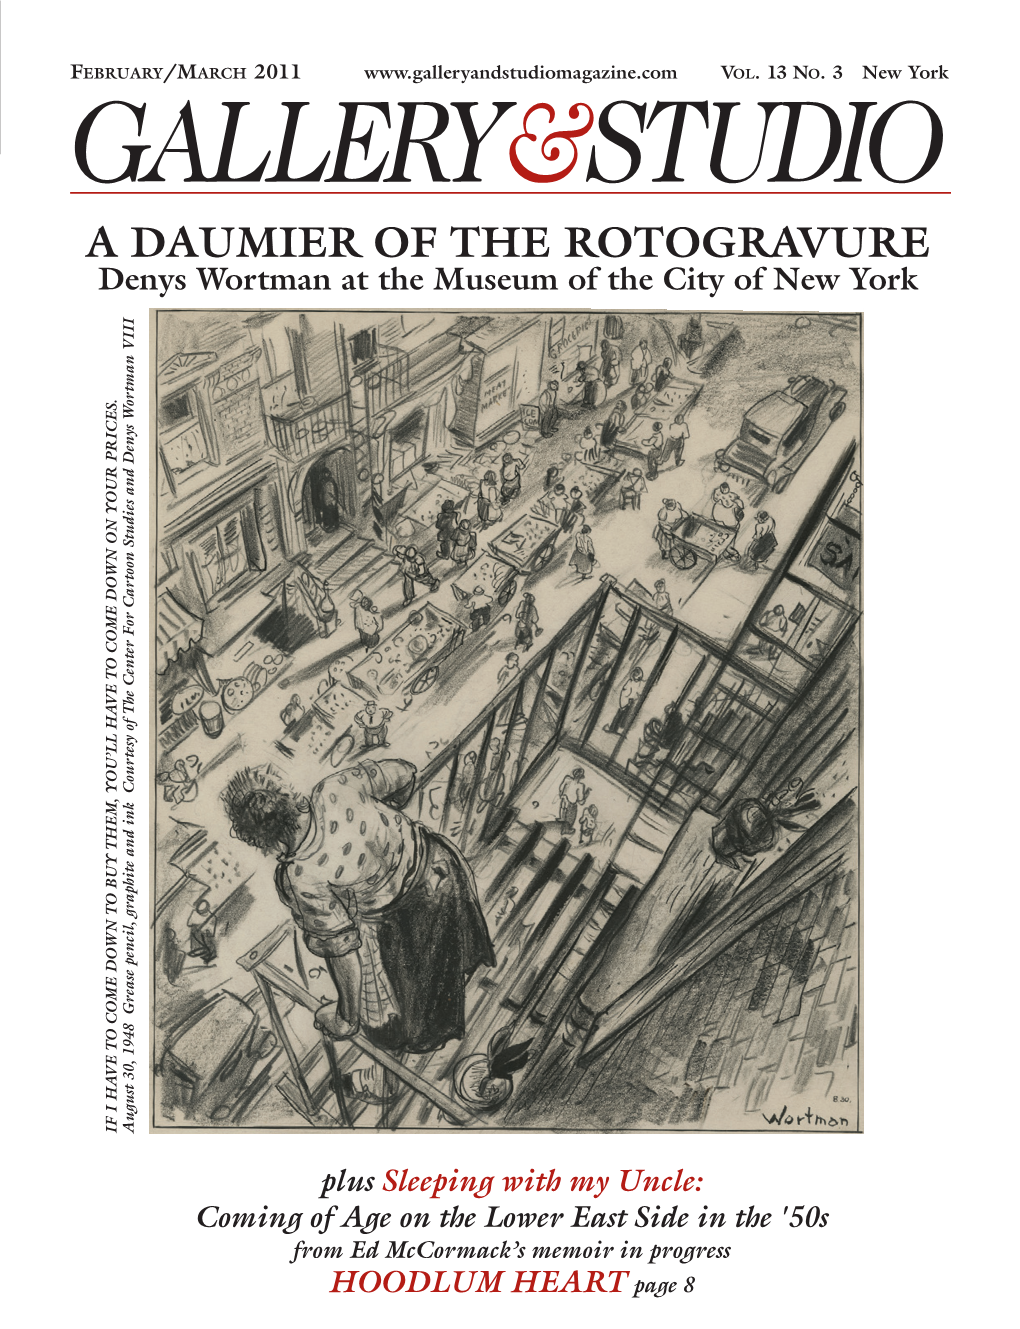 A Daumier of the Rotogravure